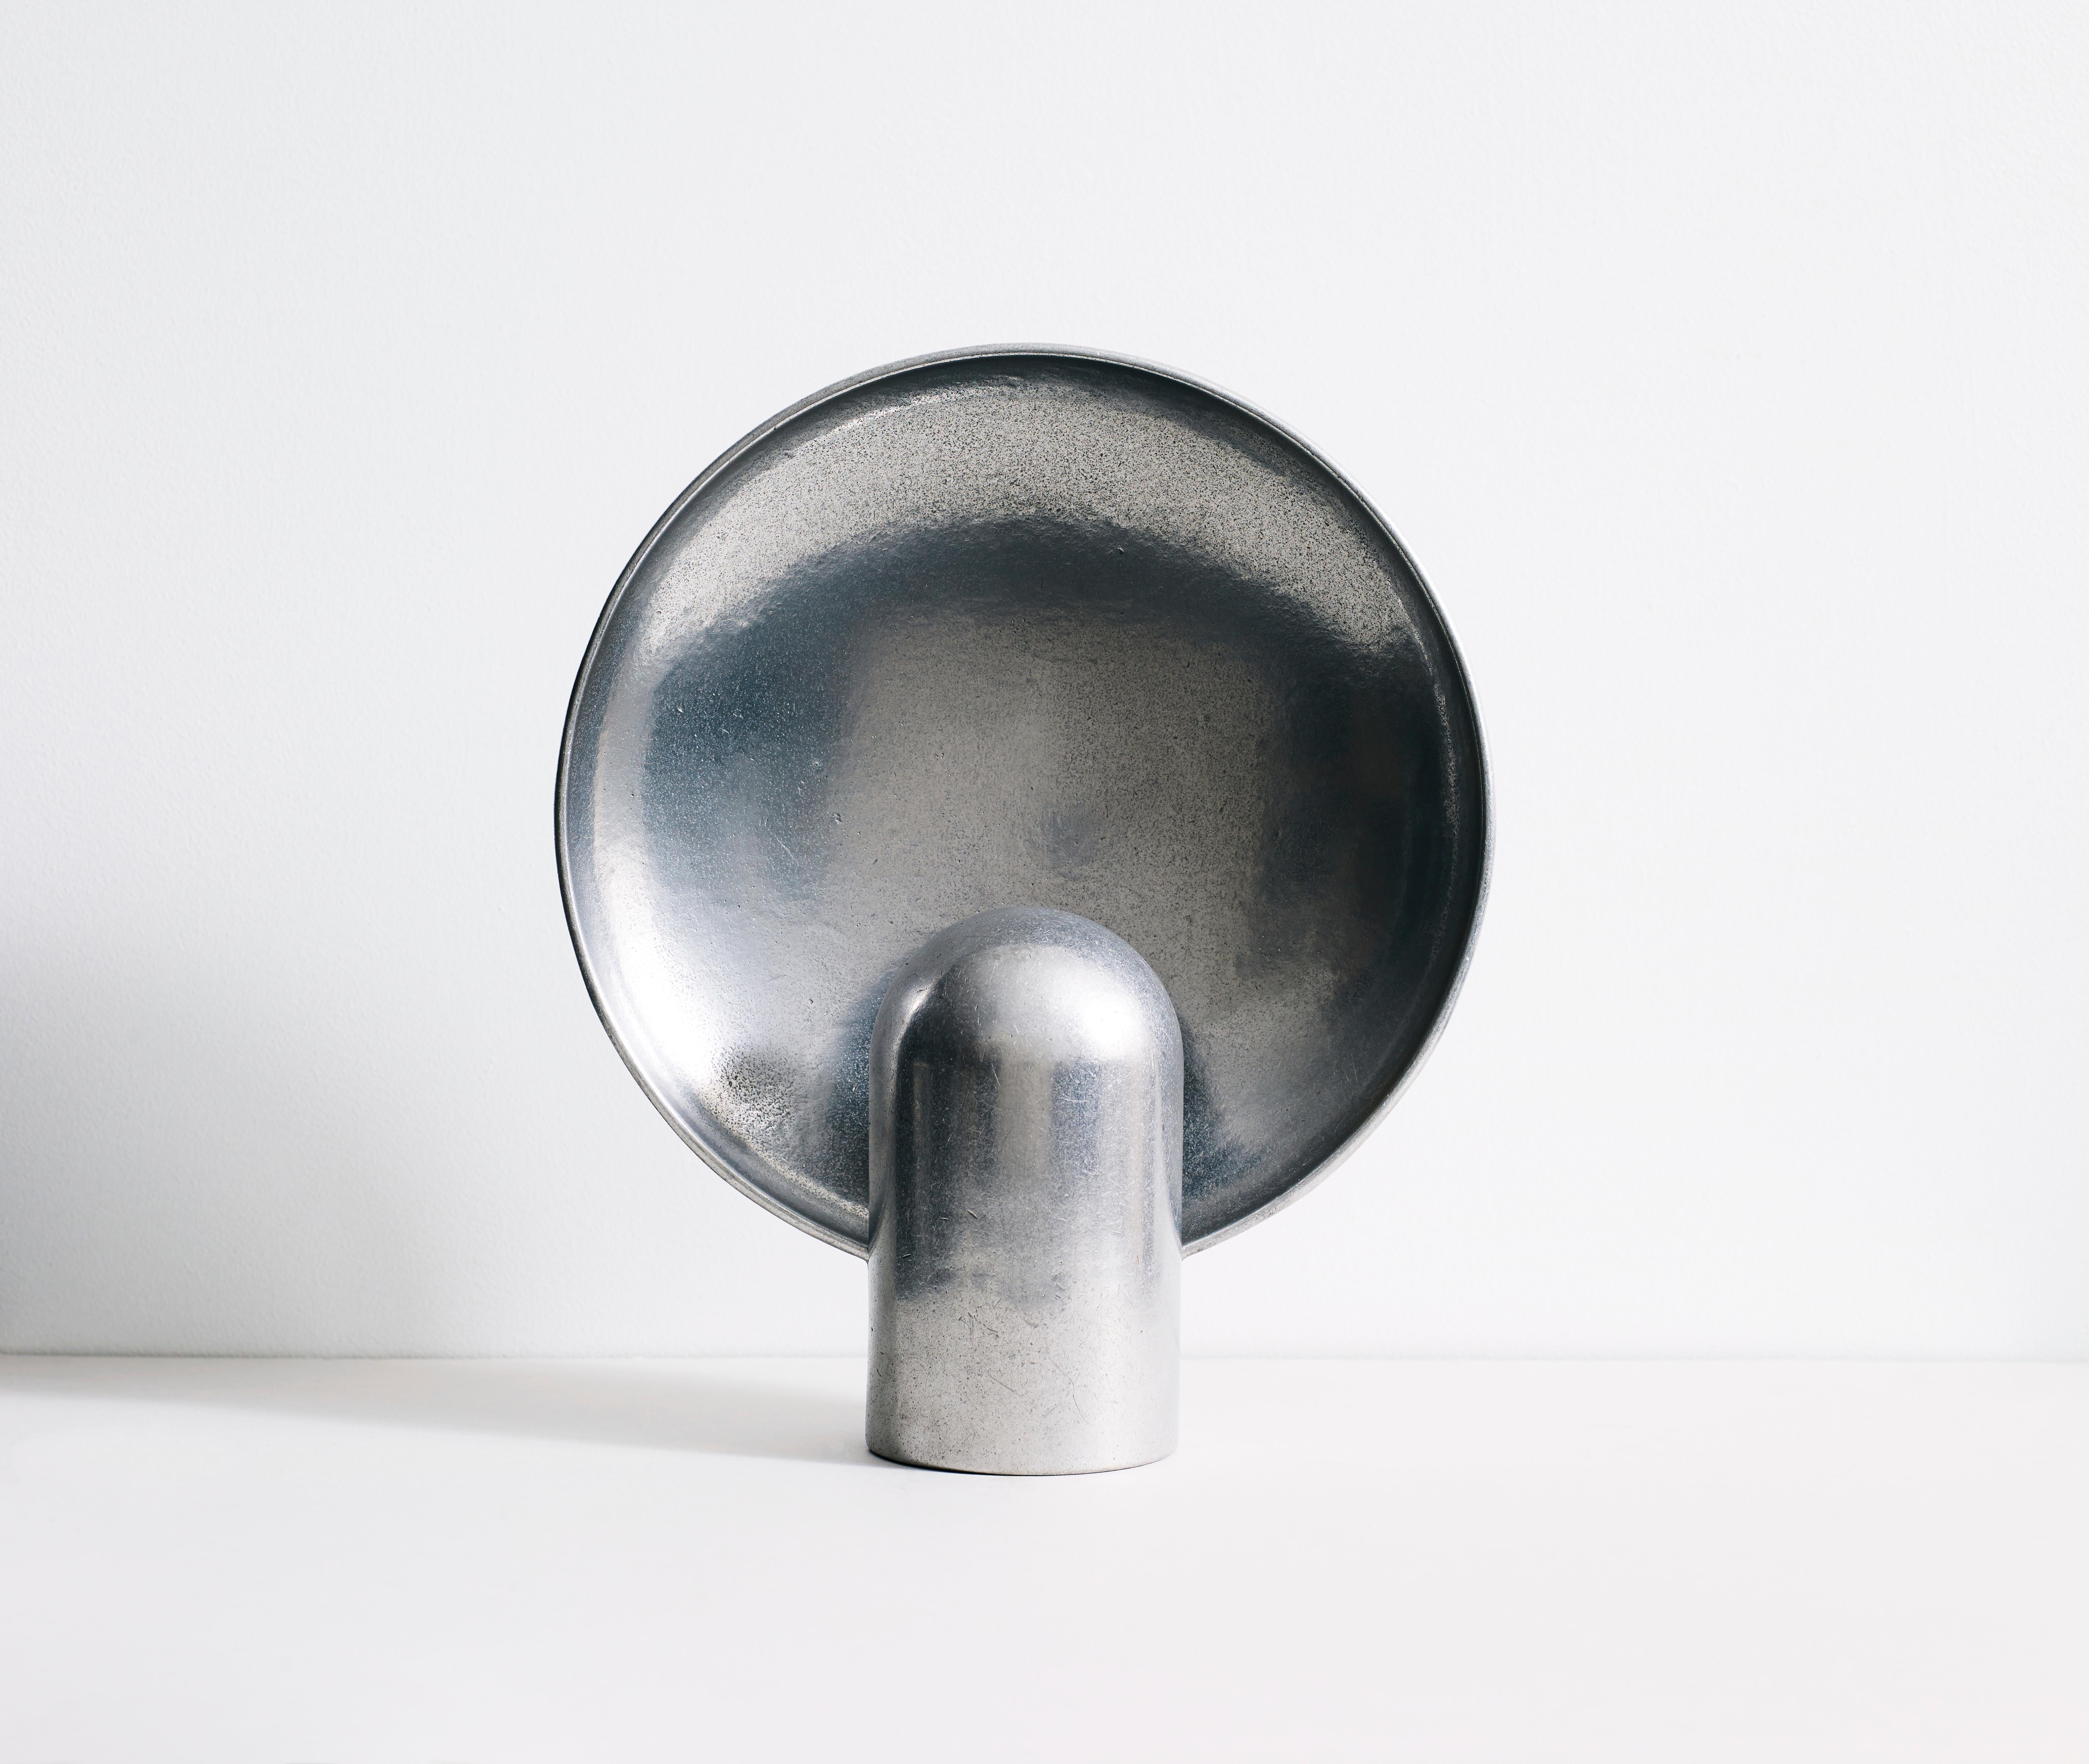 Sculpted lamp by Henry Wilson
Material: Aluminium, also available in different stones and bronze.

The surface sconce is an ambient, sculptural light cast in two halves from solid gunmetal. The casting is rumble finished for a smooth